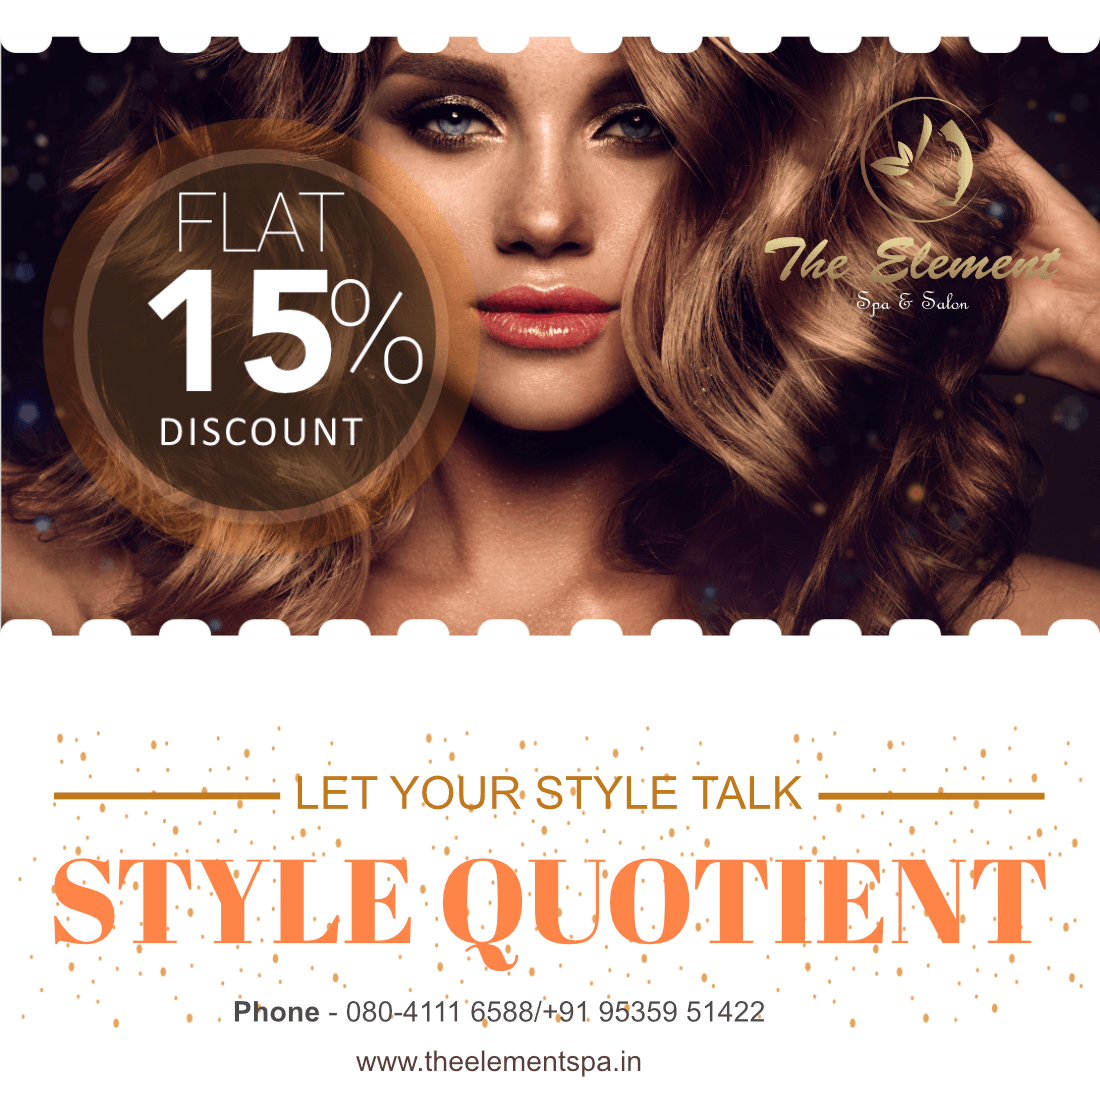 Fifteen Social Media Graphics Designs for Beauty Parlours Image 1